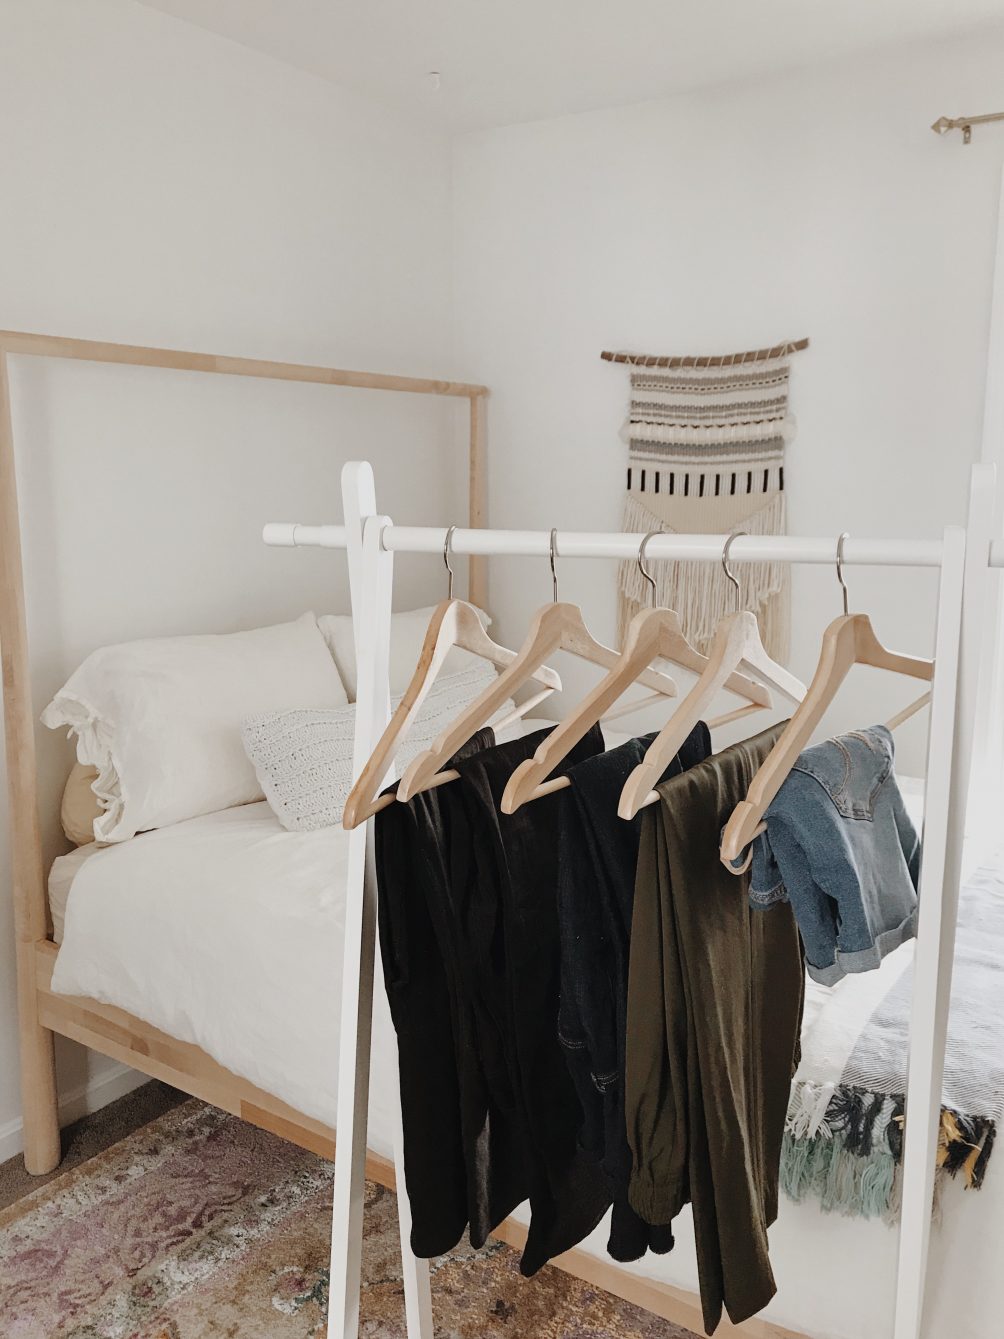 sharing my summer maternity capsule wardrobe featuring ethical brands and comfy styles